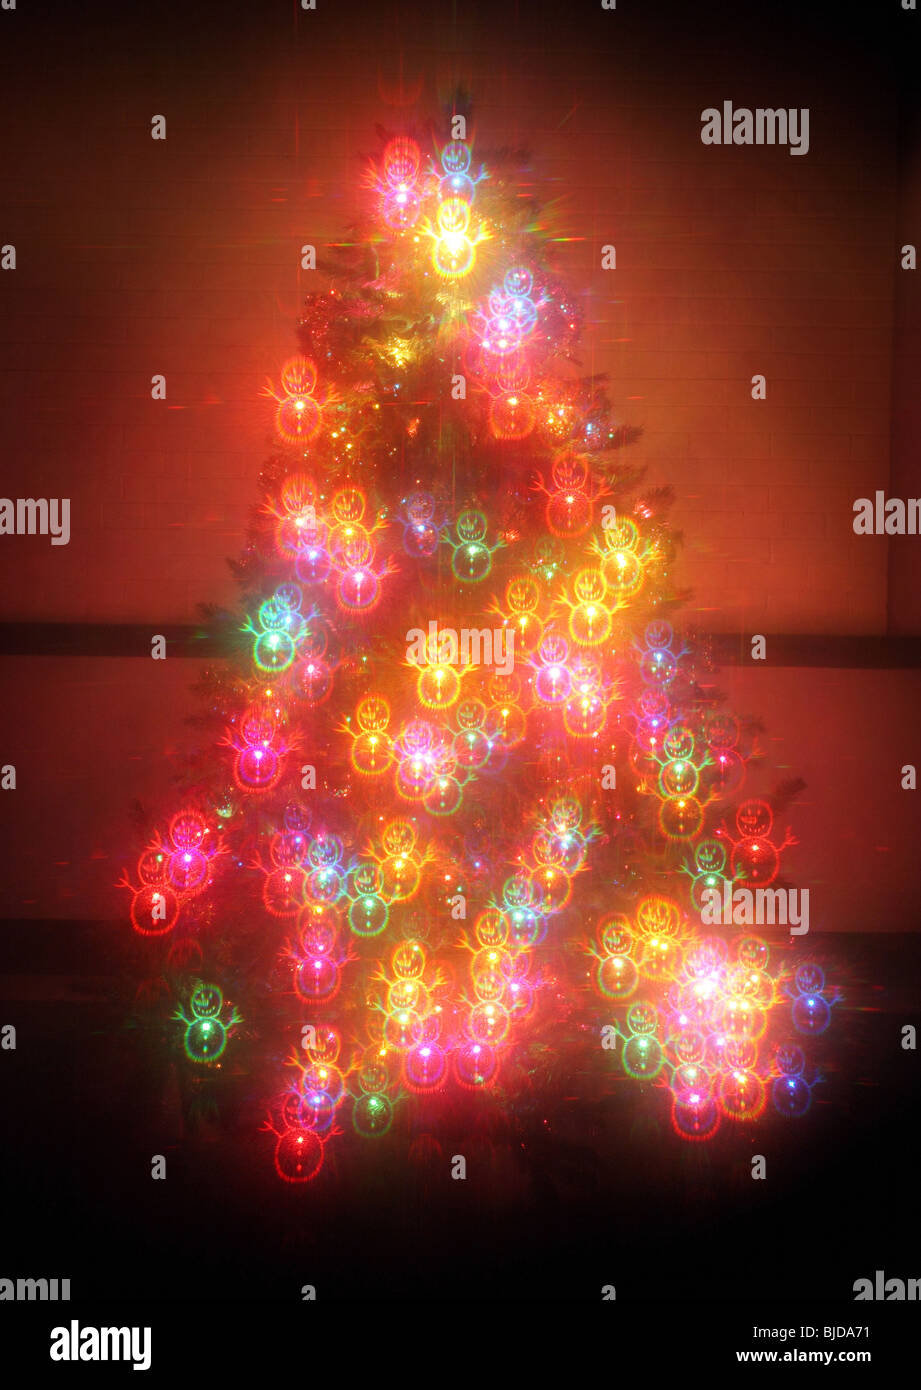 Christmas tree with glowing snowman lighting effect Stock Photo